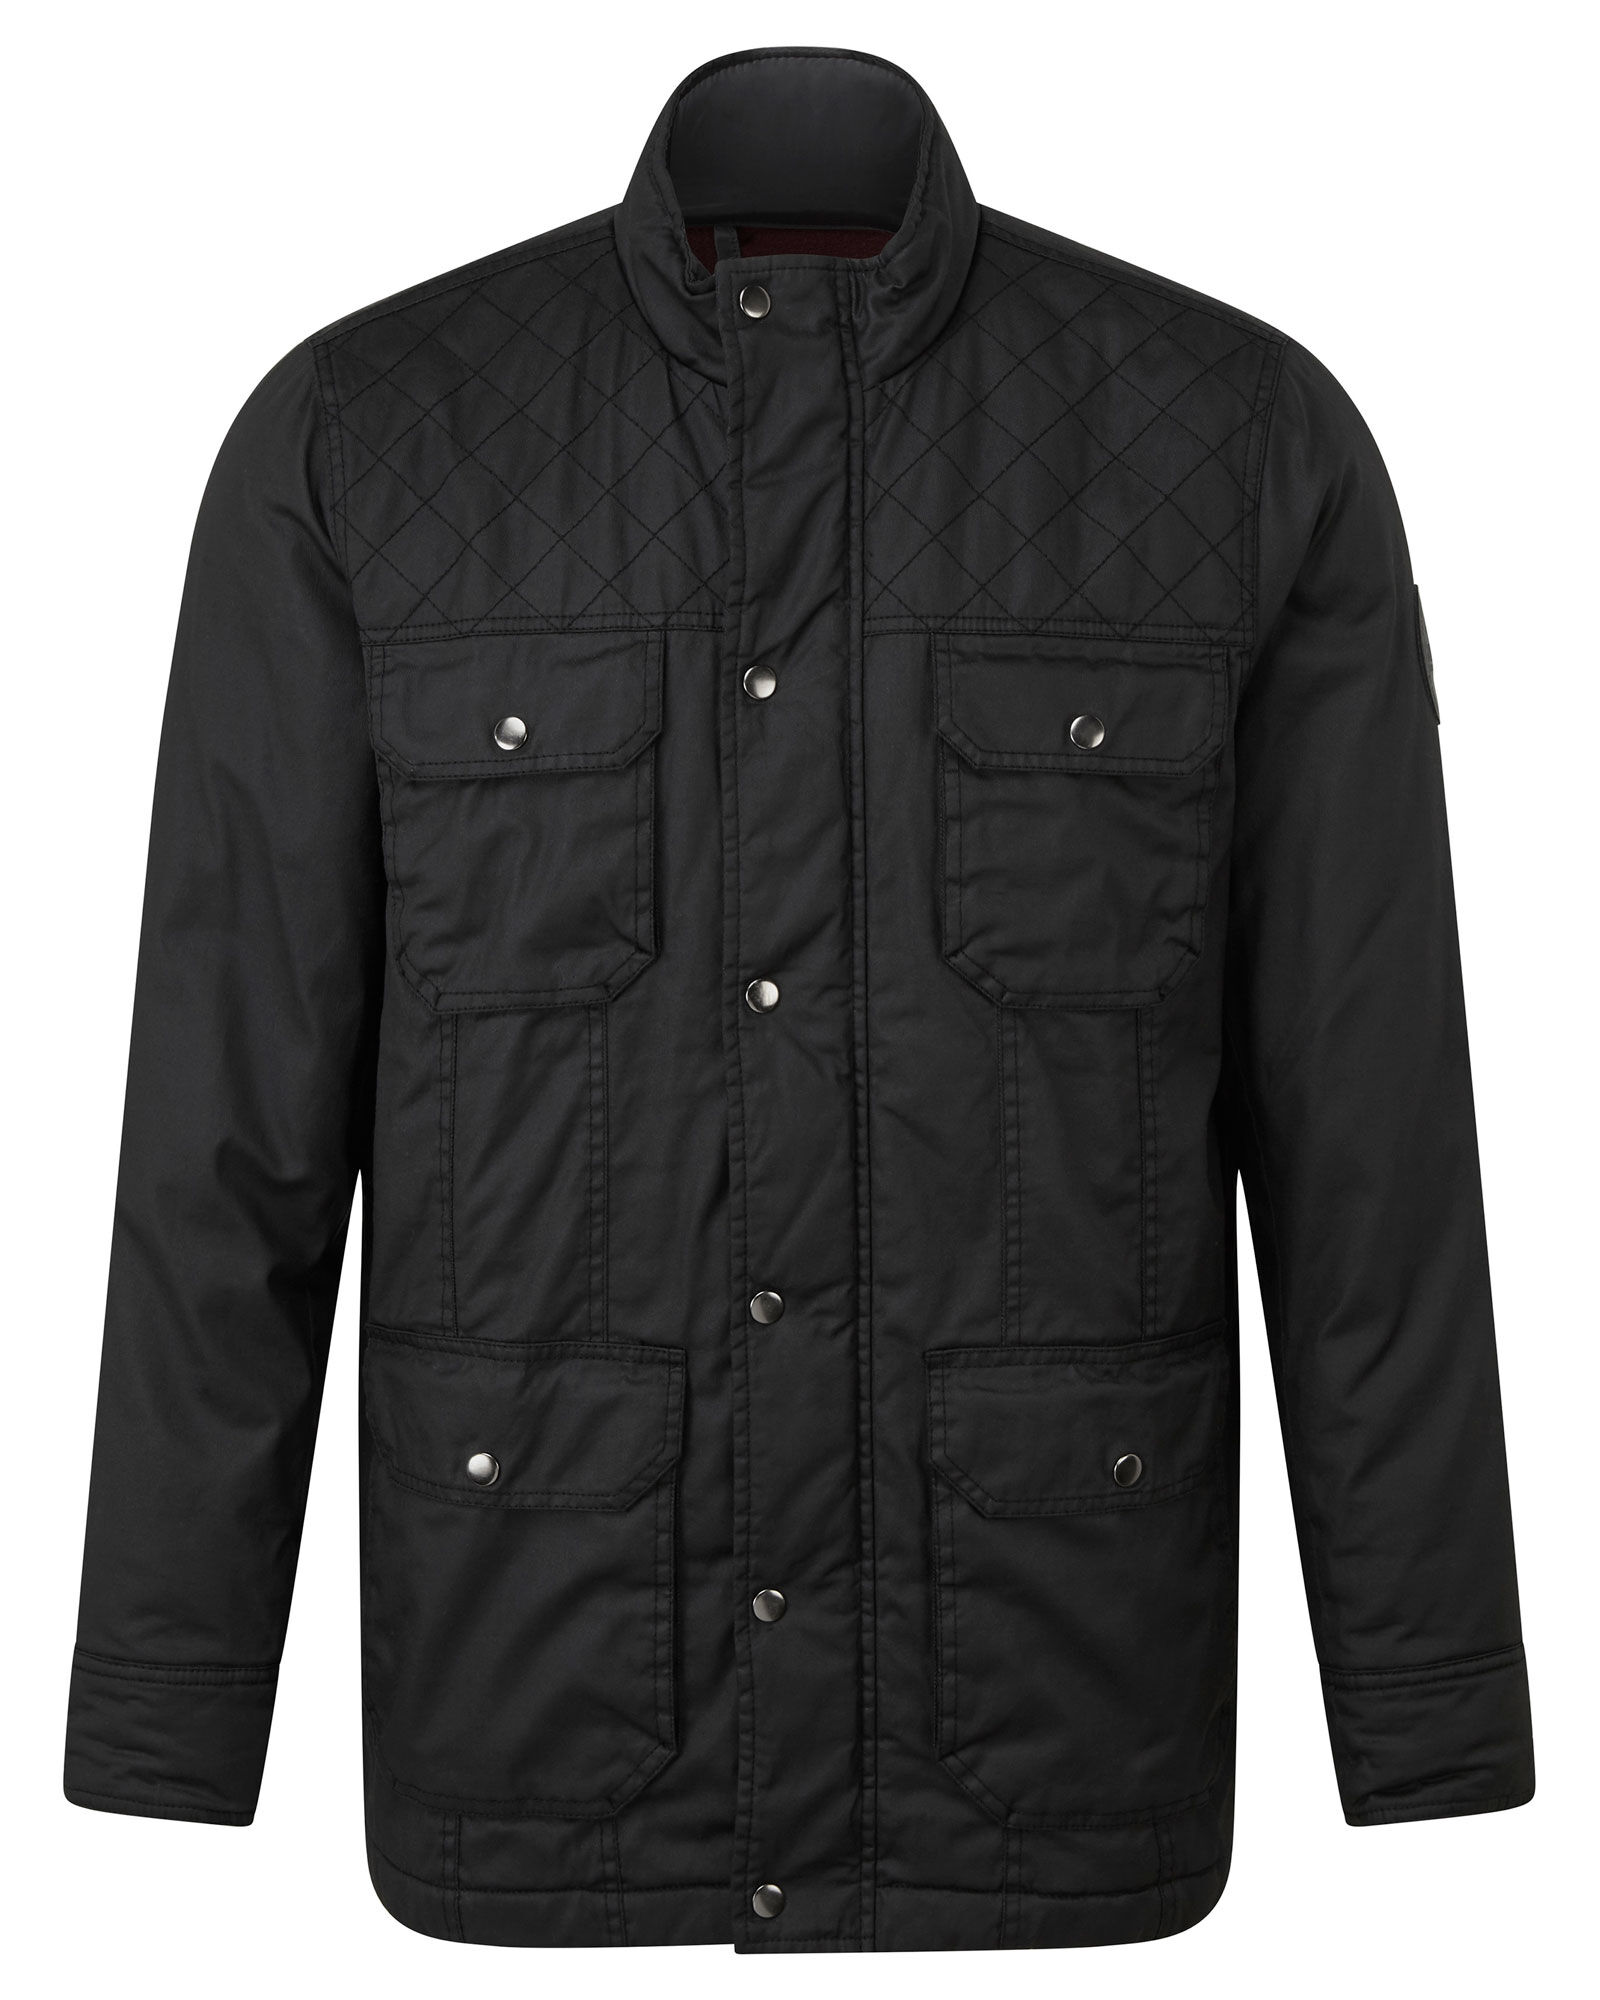 Guinness® Utility Jacket at Cotton Traders